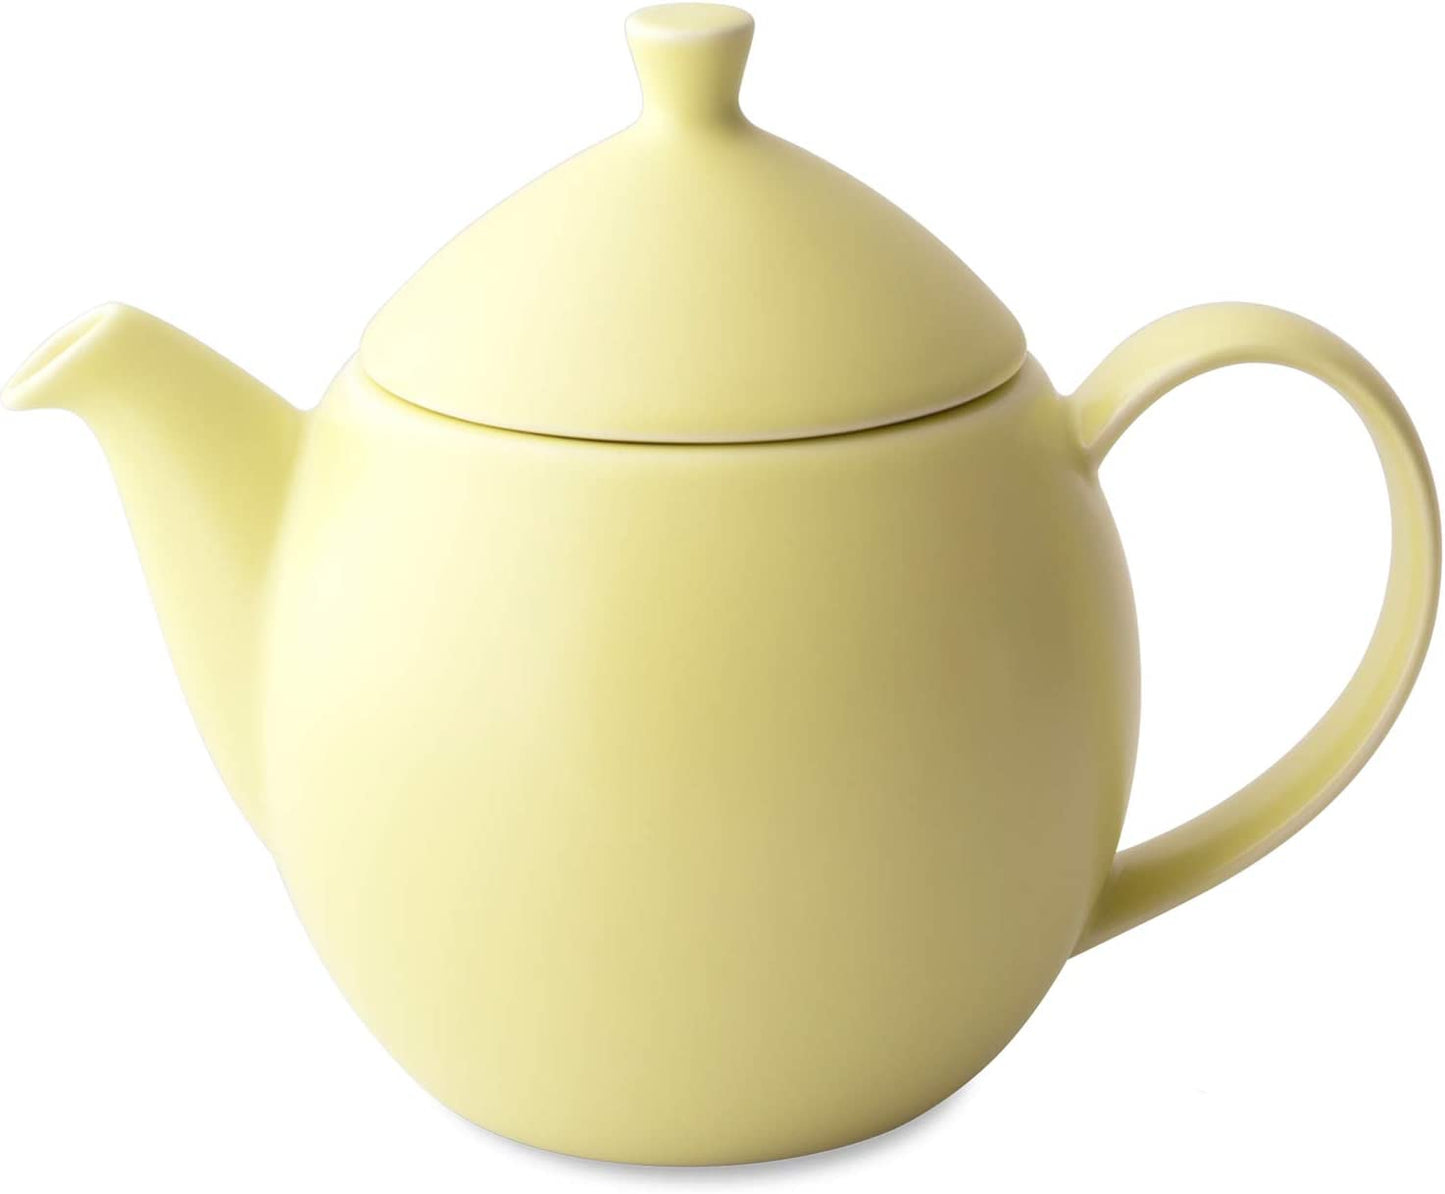 Dew Teapot with basket infuser